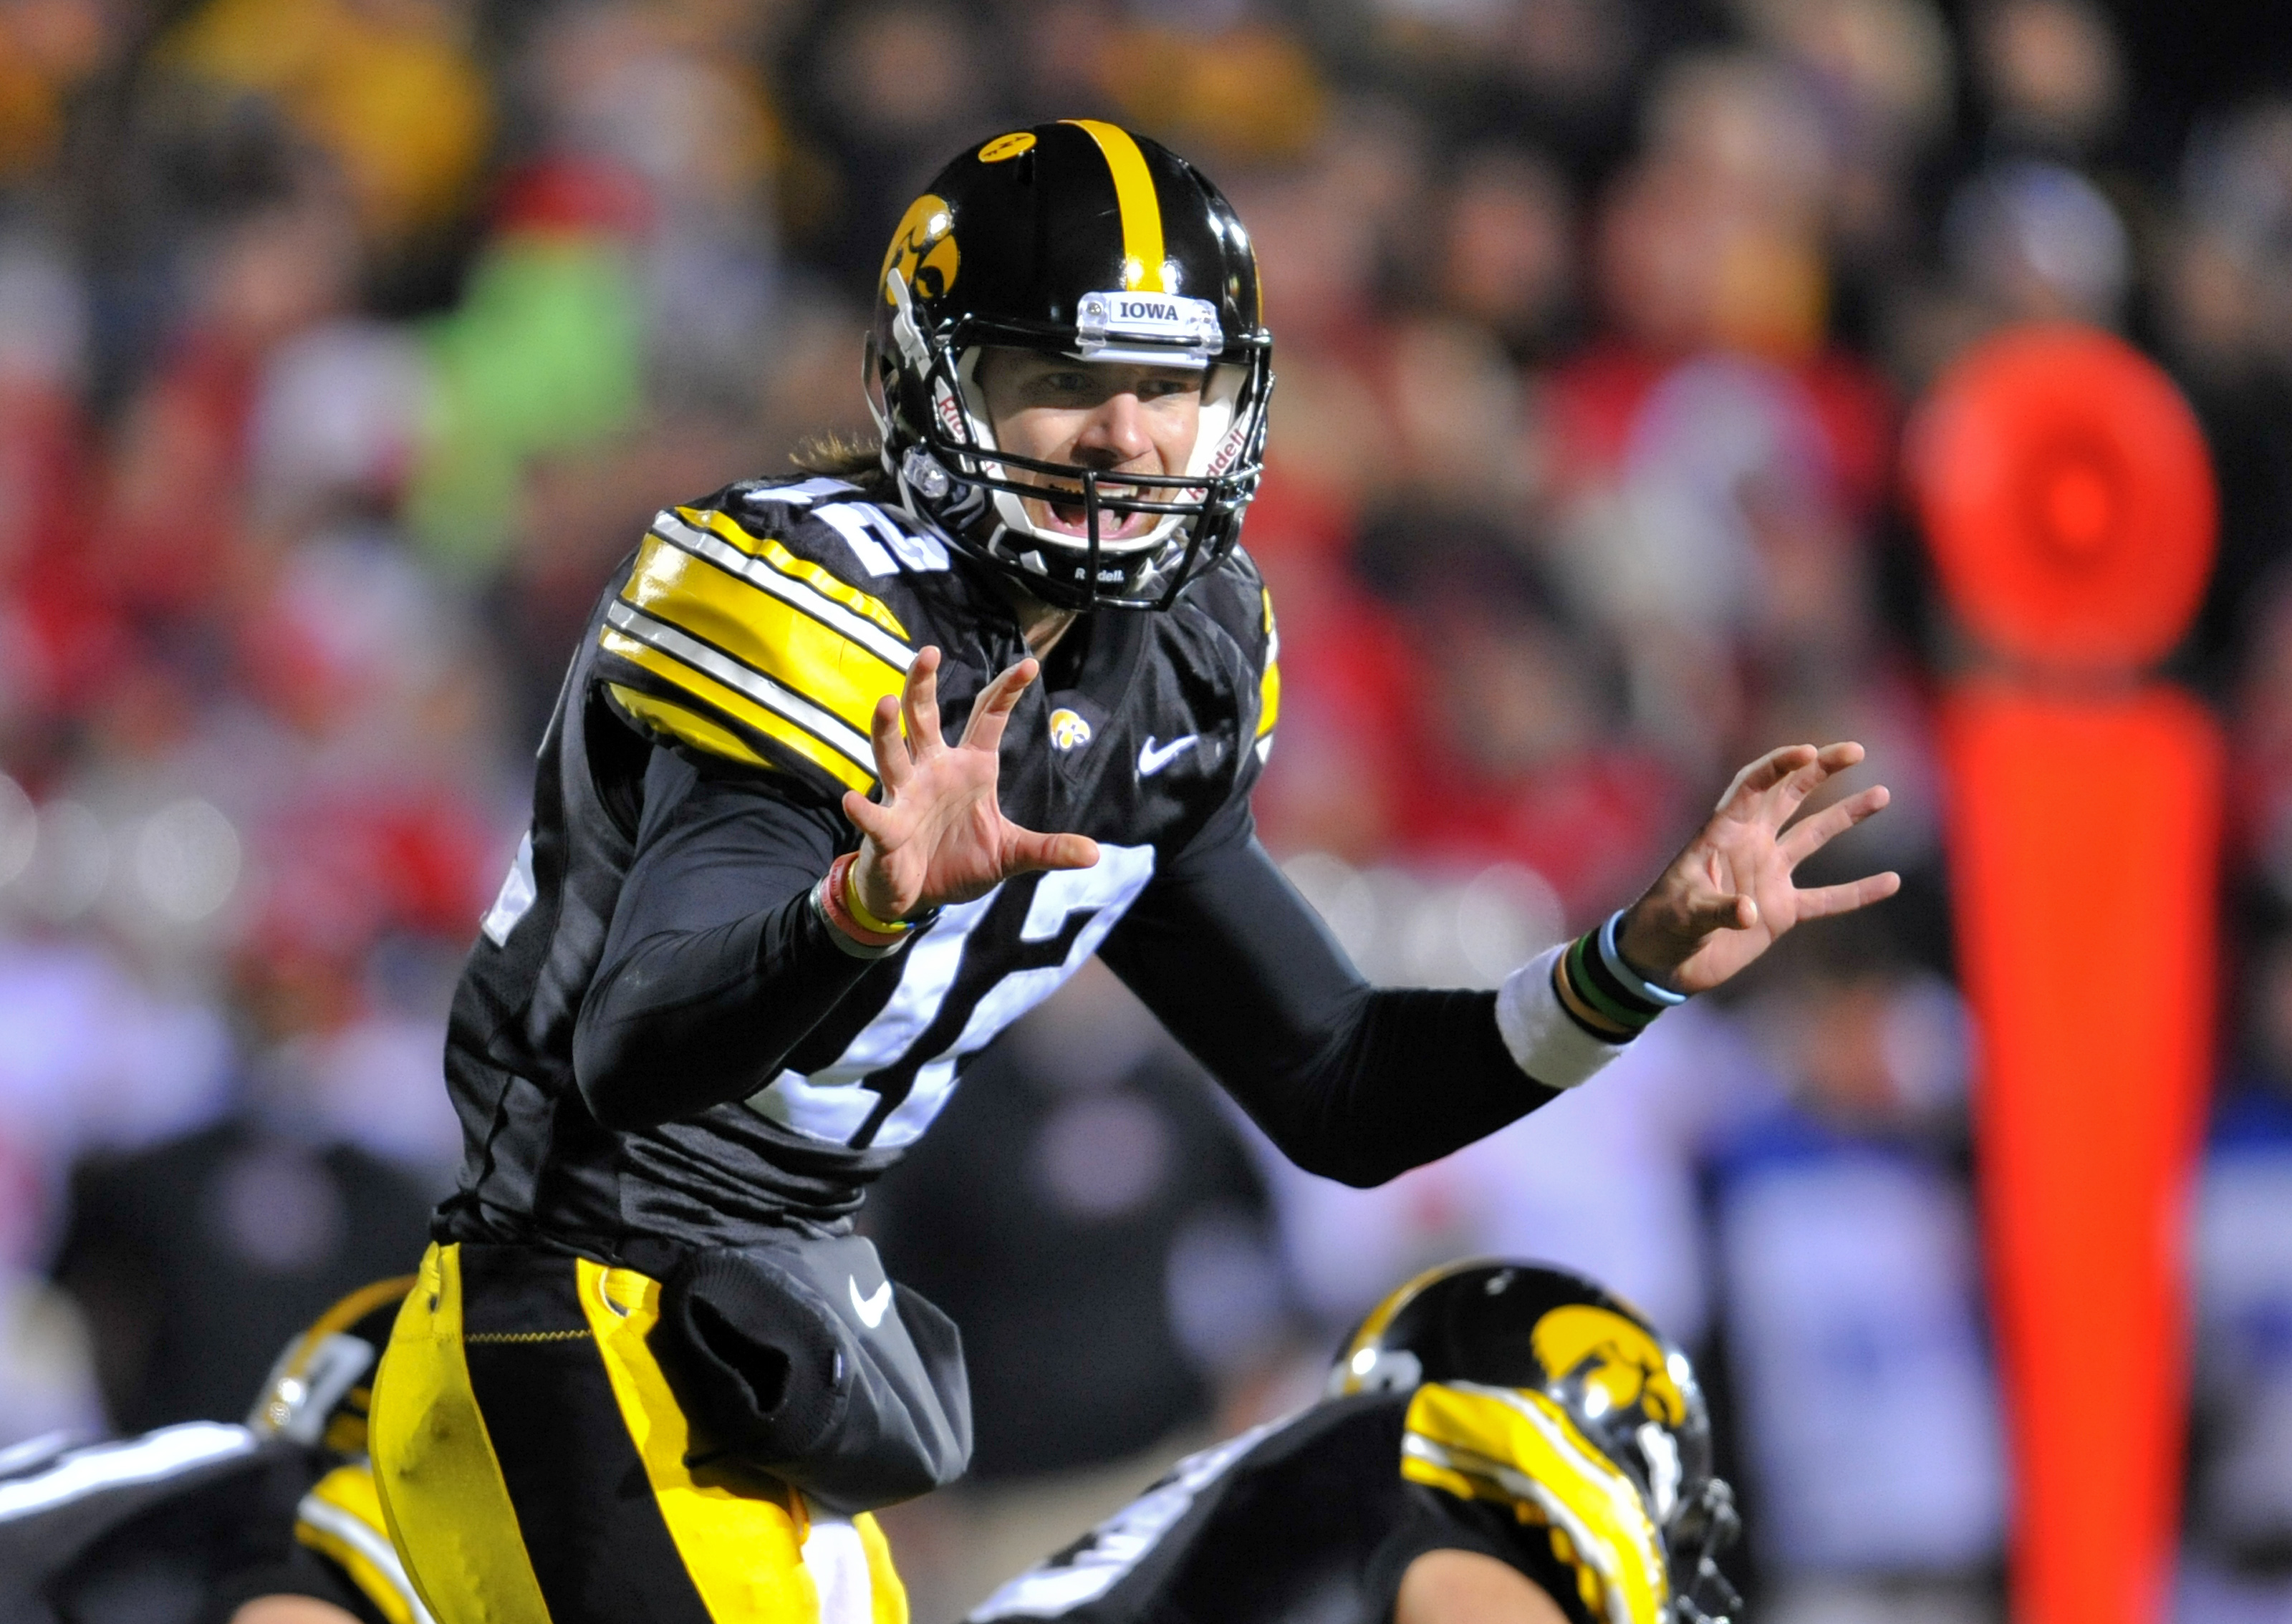 IOWA CITY, IA - NOVEMBER 20:  Quarterback Ricky Stanzi #12 of the University of Iowa Hawkeyes signals a call at the line during second half action against the Ohio State Buckeyes at Kinnick Stadium on November 20, 2010 in Iowa City, Iowa. Ohio State won 2